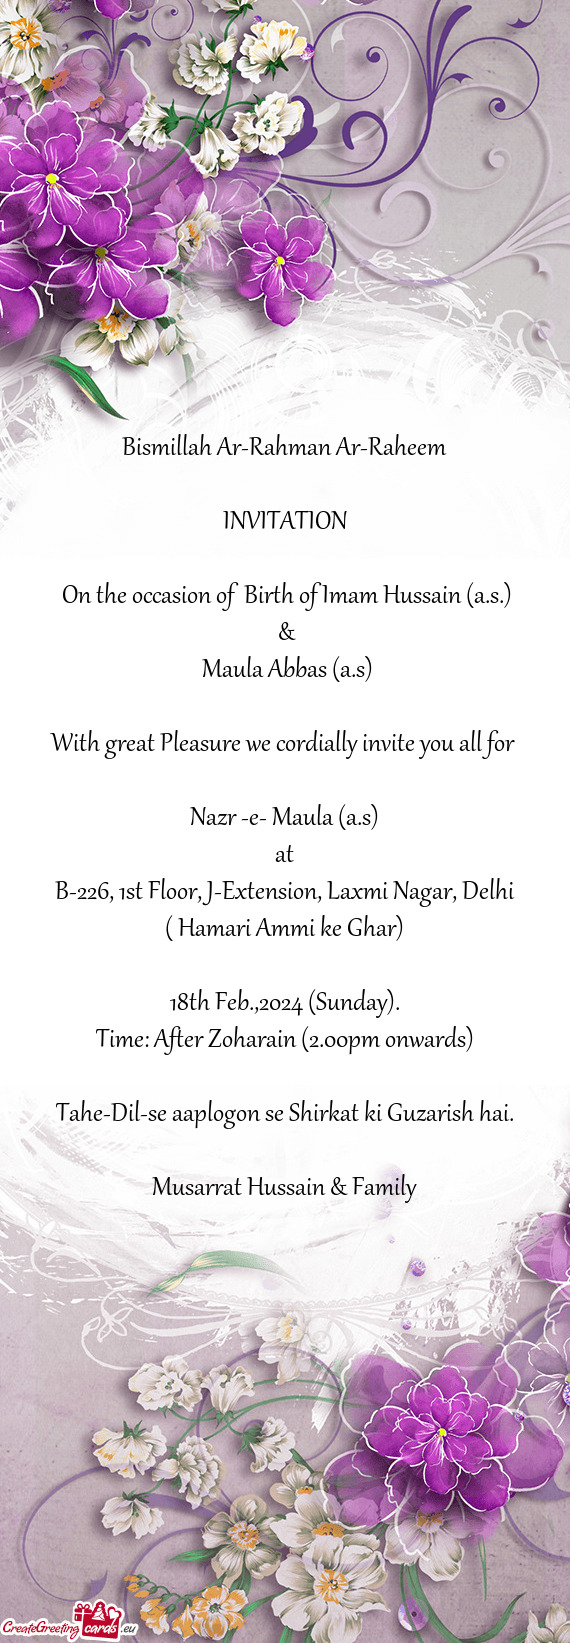 On the occasion of Birth of Imam Hussain (a.s.)